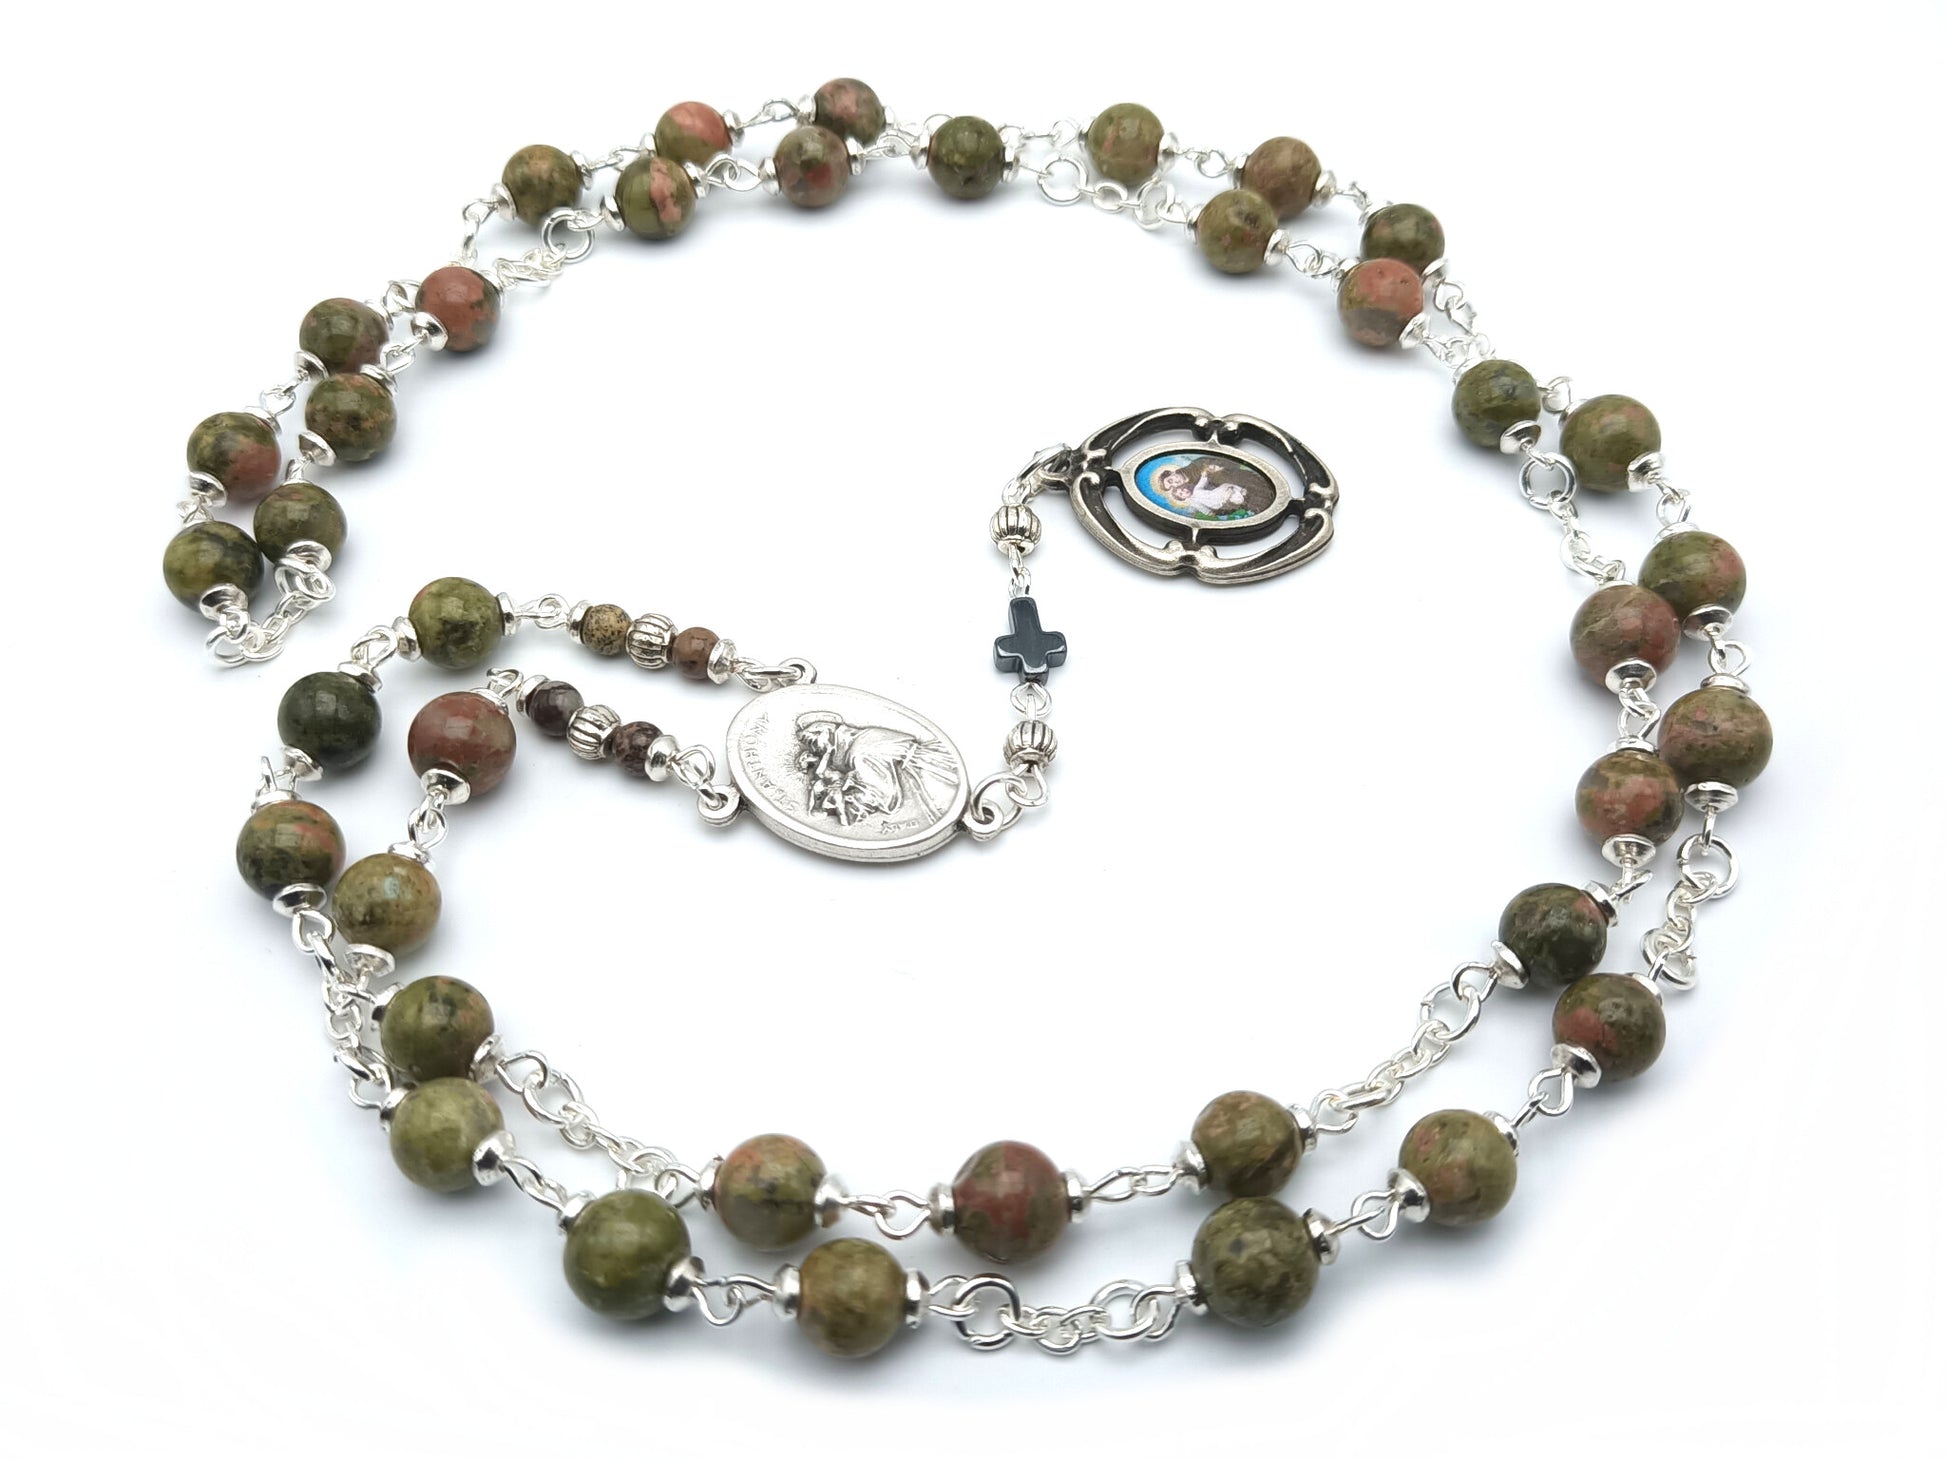 Saint Anthony unique rosary beads prayer chaplet with green jasper gemstone beads, silver end picture medal and centre medal.